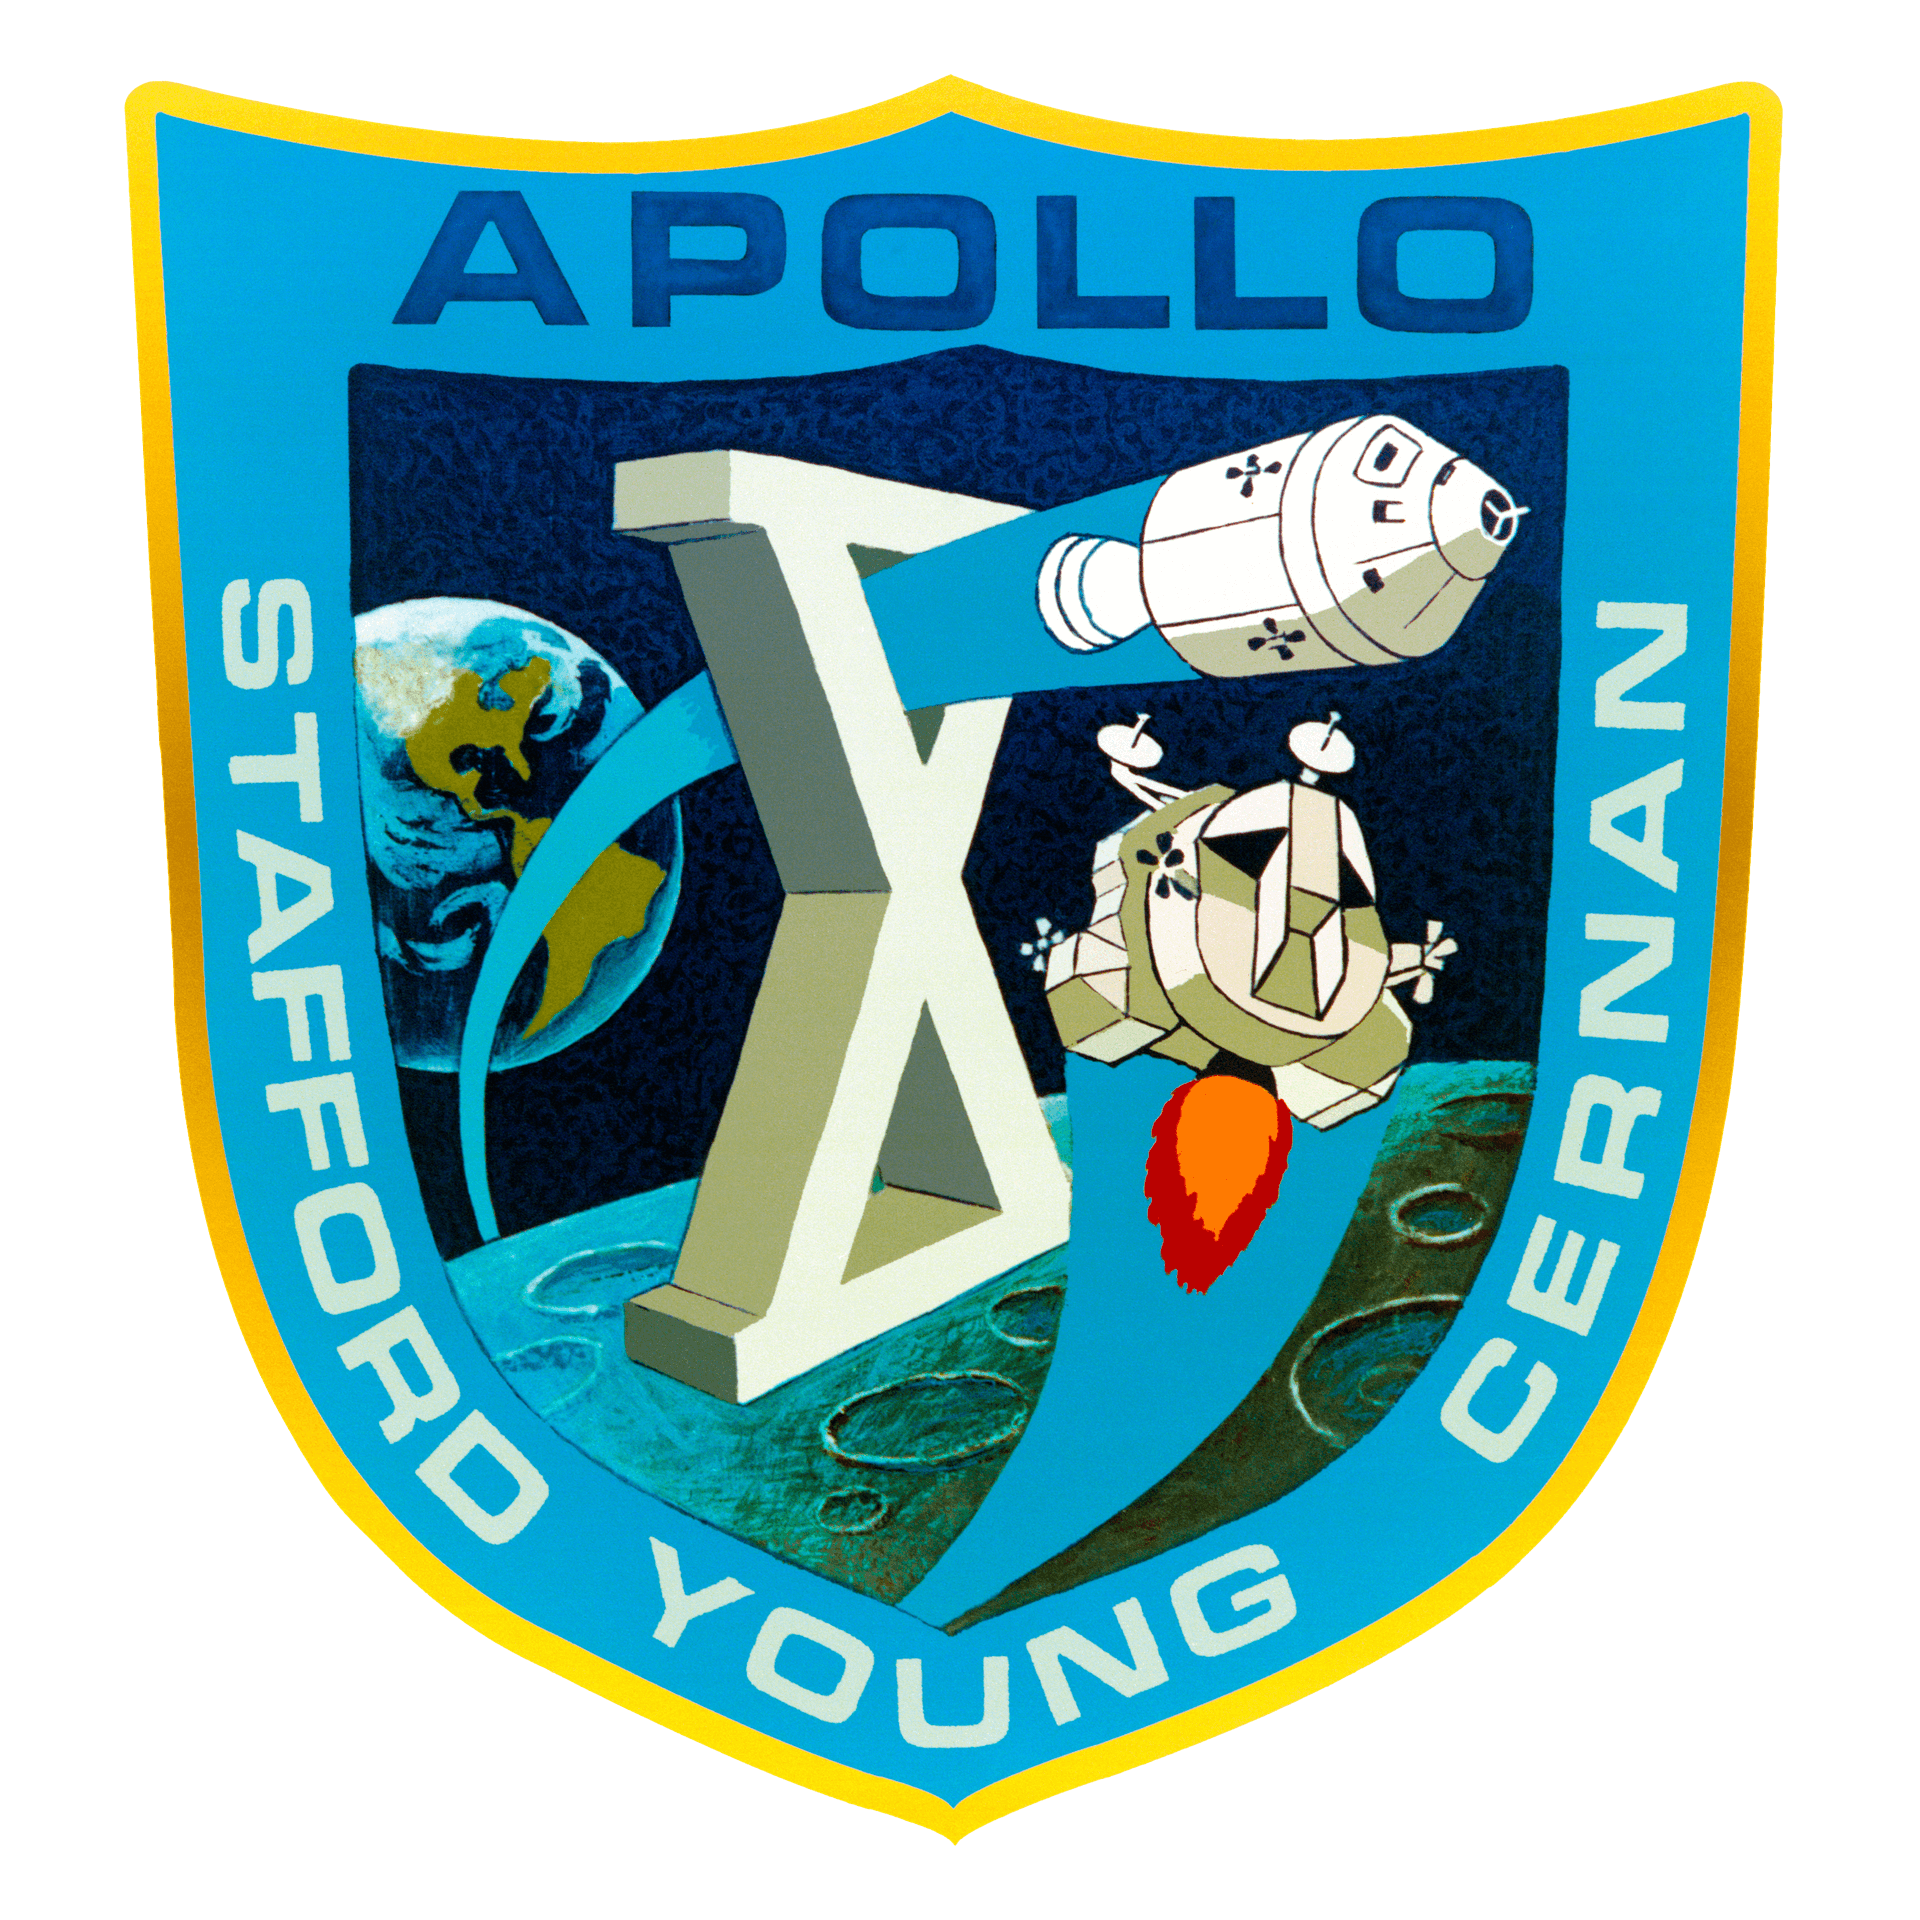 Mission patch for Apollo 10